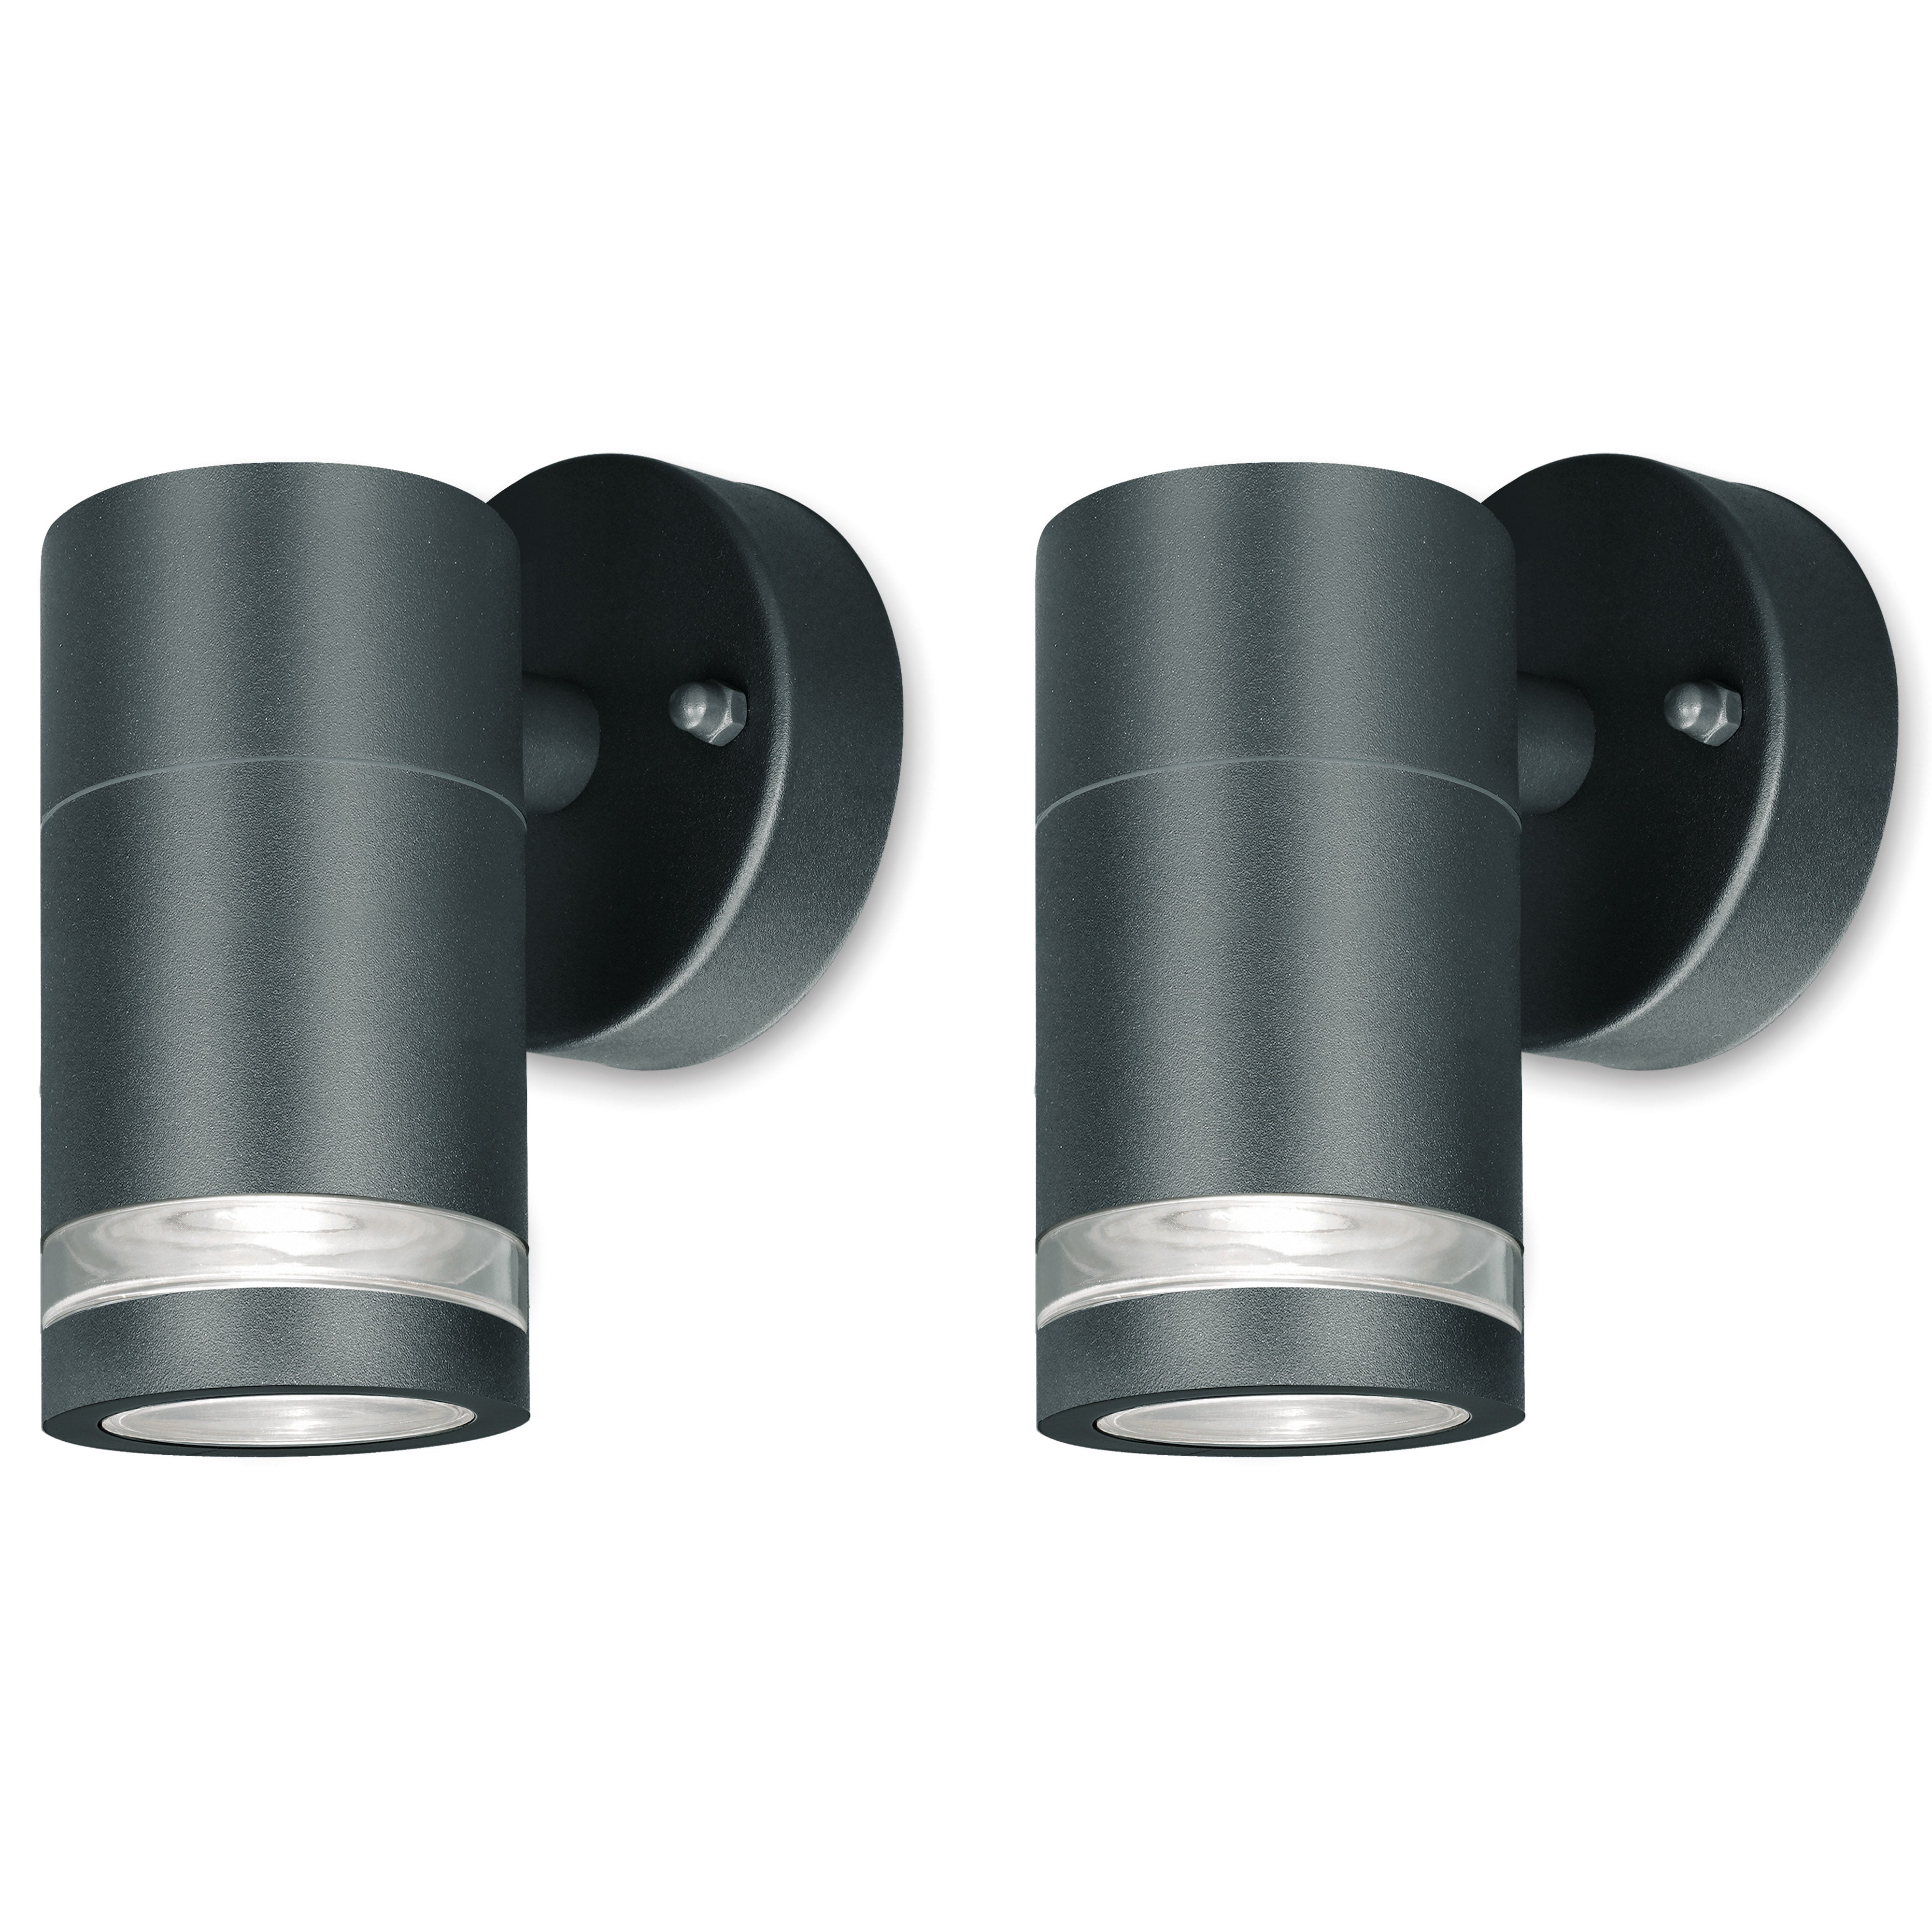 4lite Marinus GU10 Single Direction Outdoor Wall Light without PIR - Anthracite (Pack of 2)